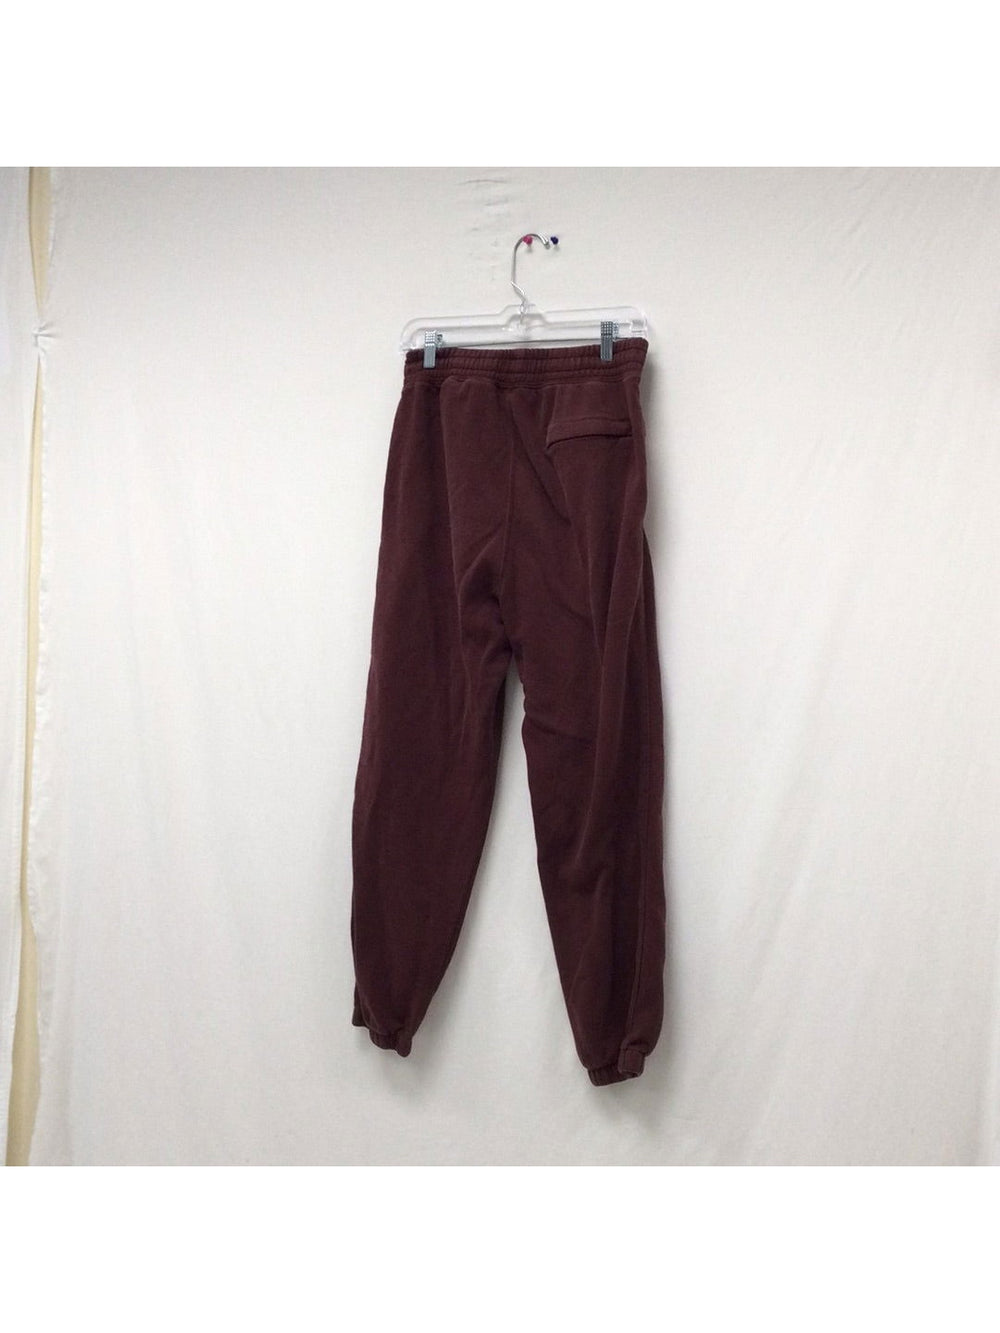 H&M Women's Burgundy Sweatpants - The Kennedy Collective Thrift - 